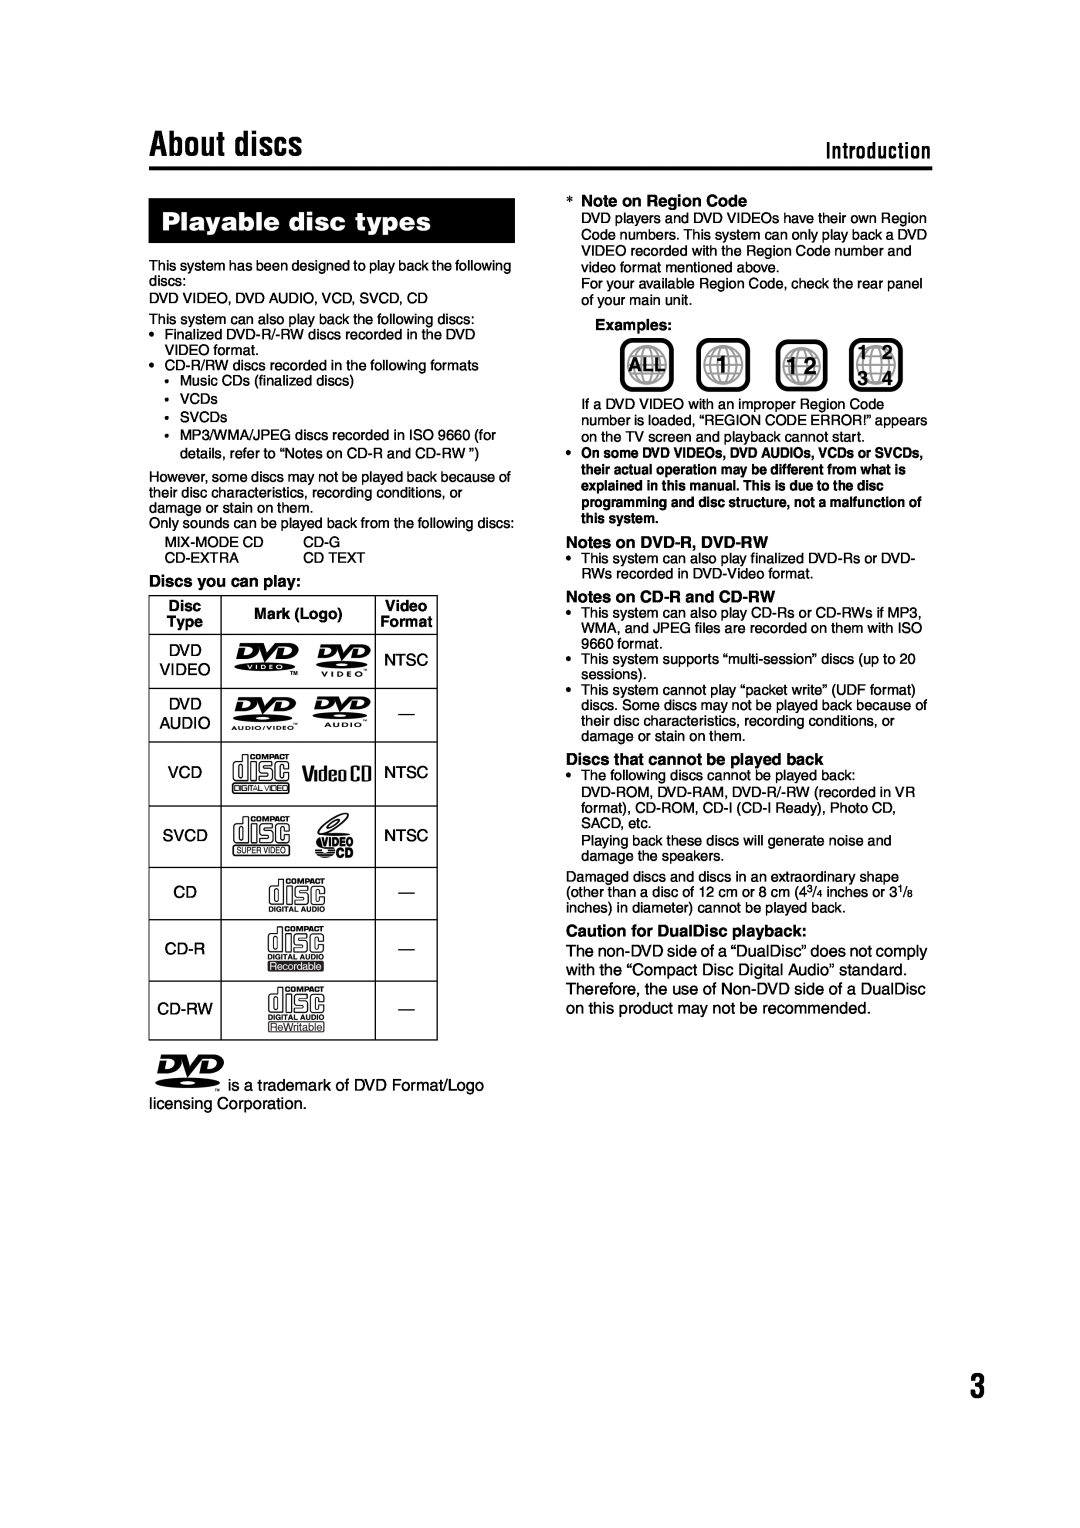 JVC GVT0142-001A manual About discs, Playable disc types, Discs you can play, Note on Region Code, Notes on DVD-R, DVD-RW 